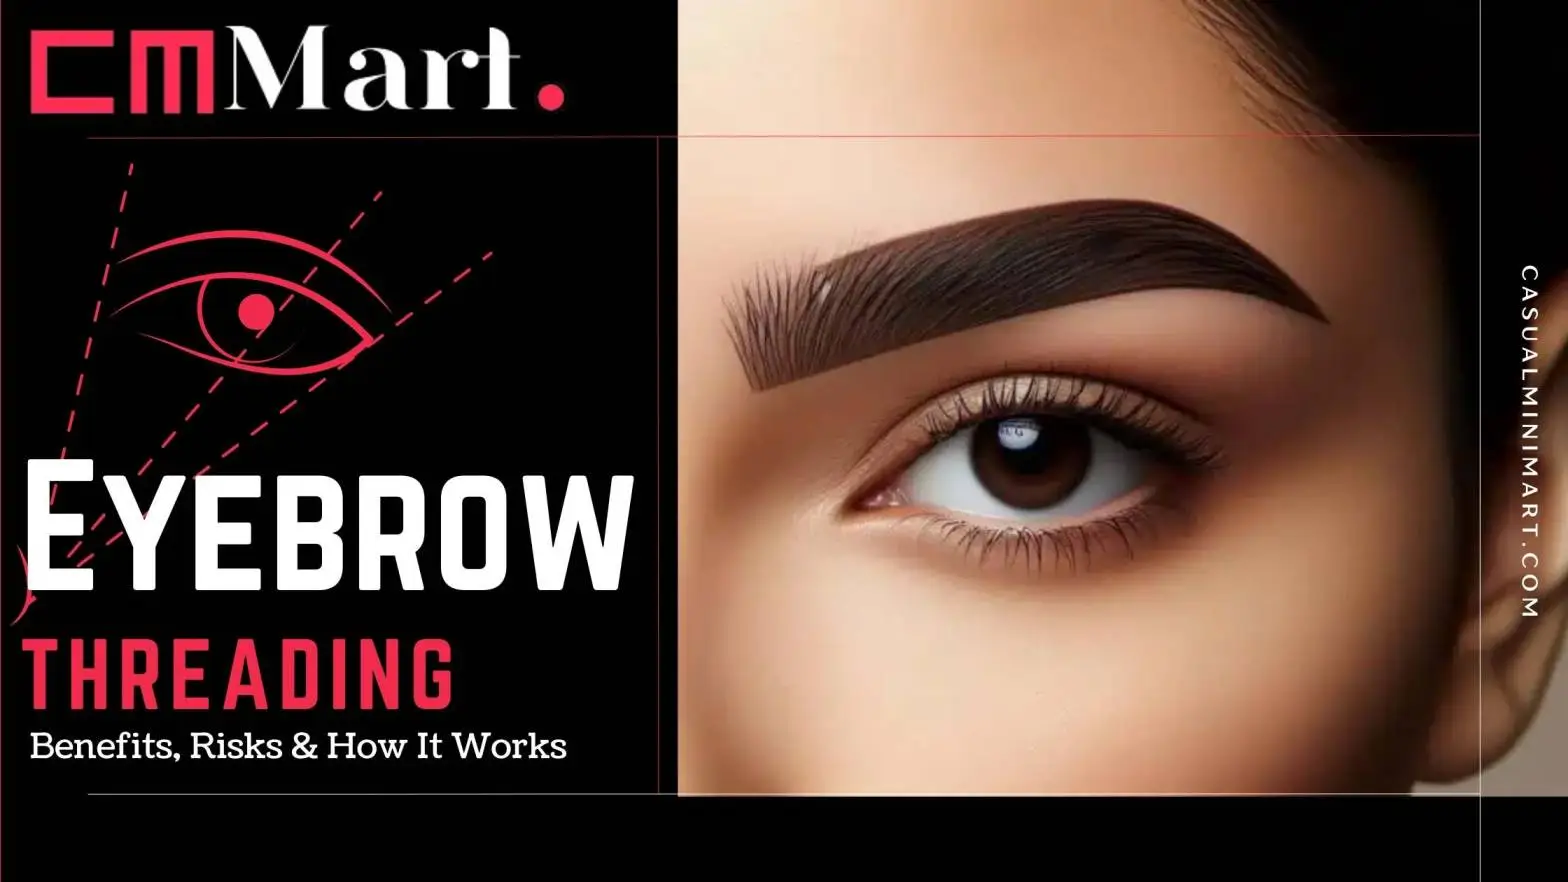 What Is Eyebrow Threading? Benefits, Risks & How It Works